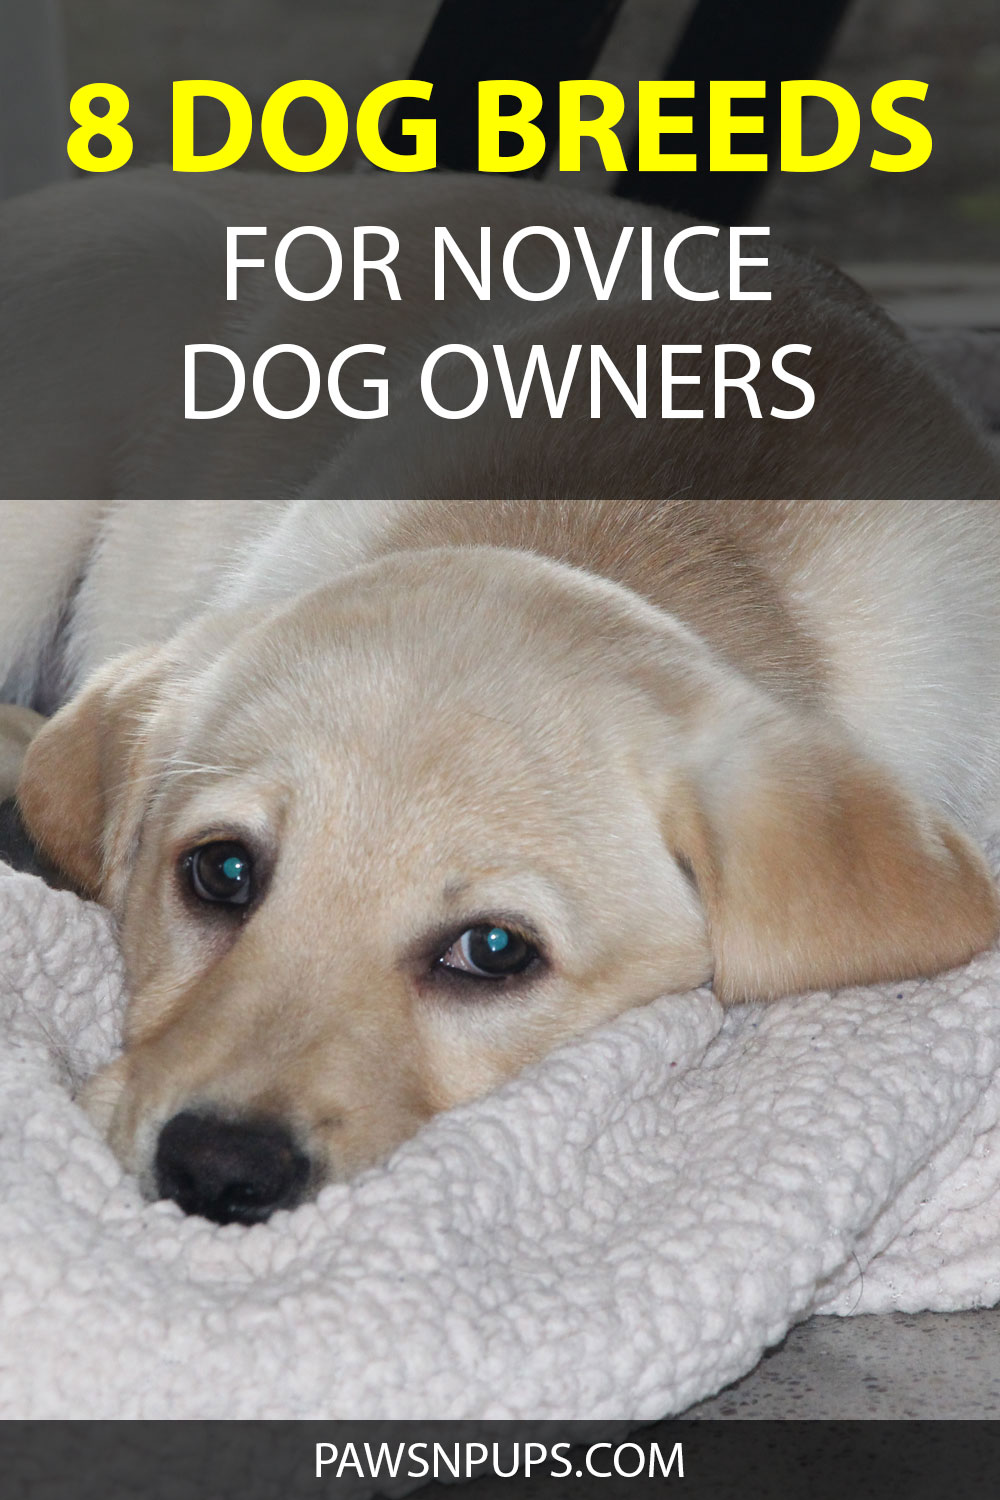 8 Dog Breeds For Novice Dog Owners - Yellow Lab puppy has face in fleece blanket